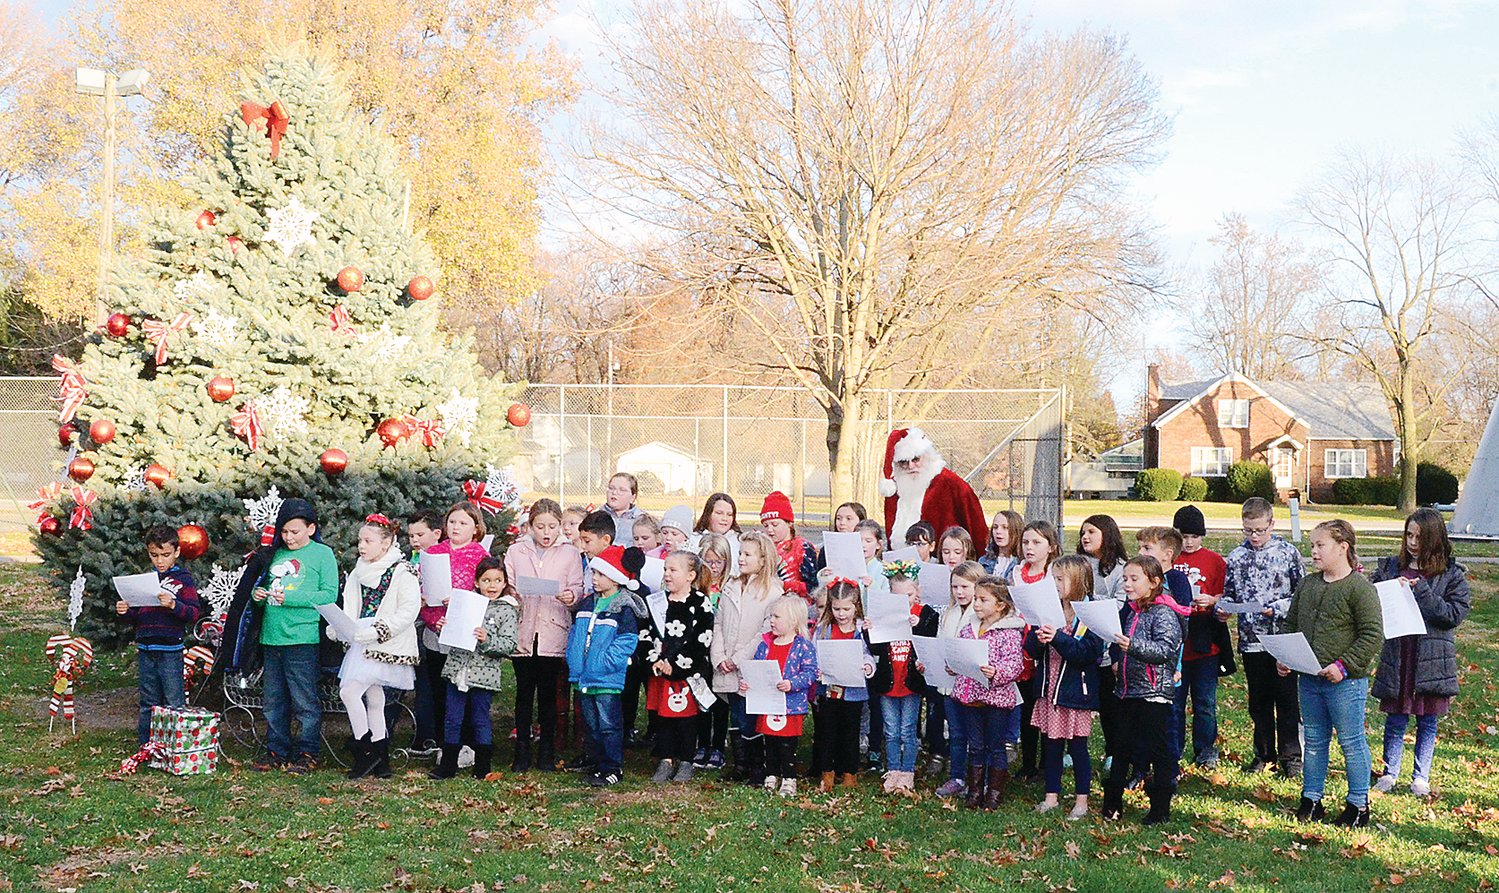 Under the direction of teacher Sarah Weatherford, elementary students in the Panhandle School District, along with a little help from Santa, sang several holiday songs just before the annual tree lighting ceremony in downtown Farmersville on Saturday, Nov. 27.